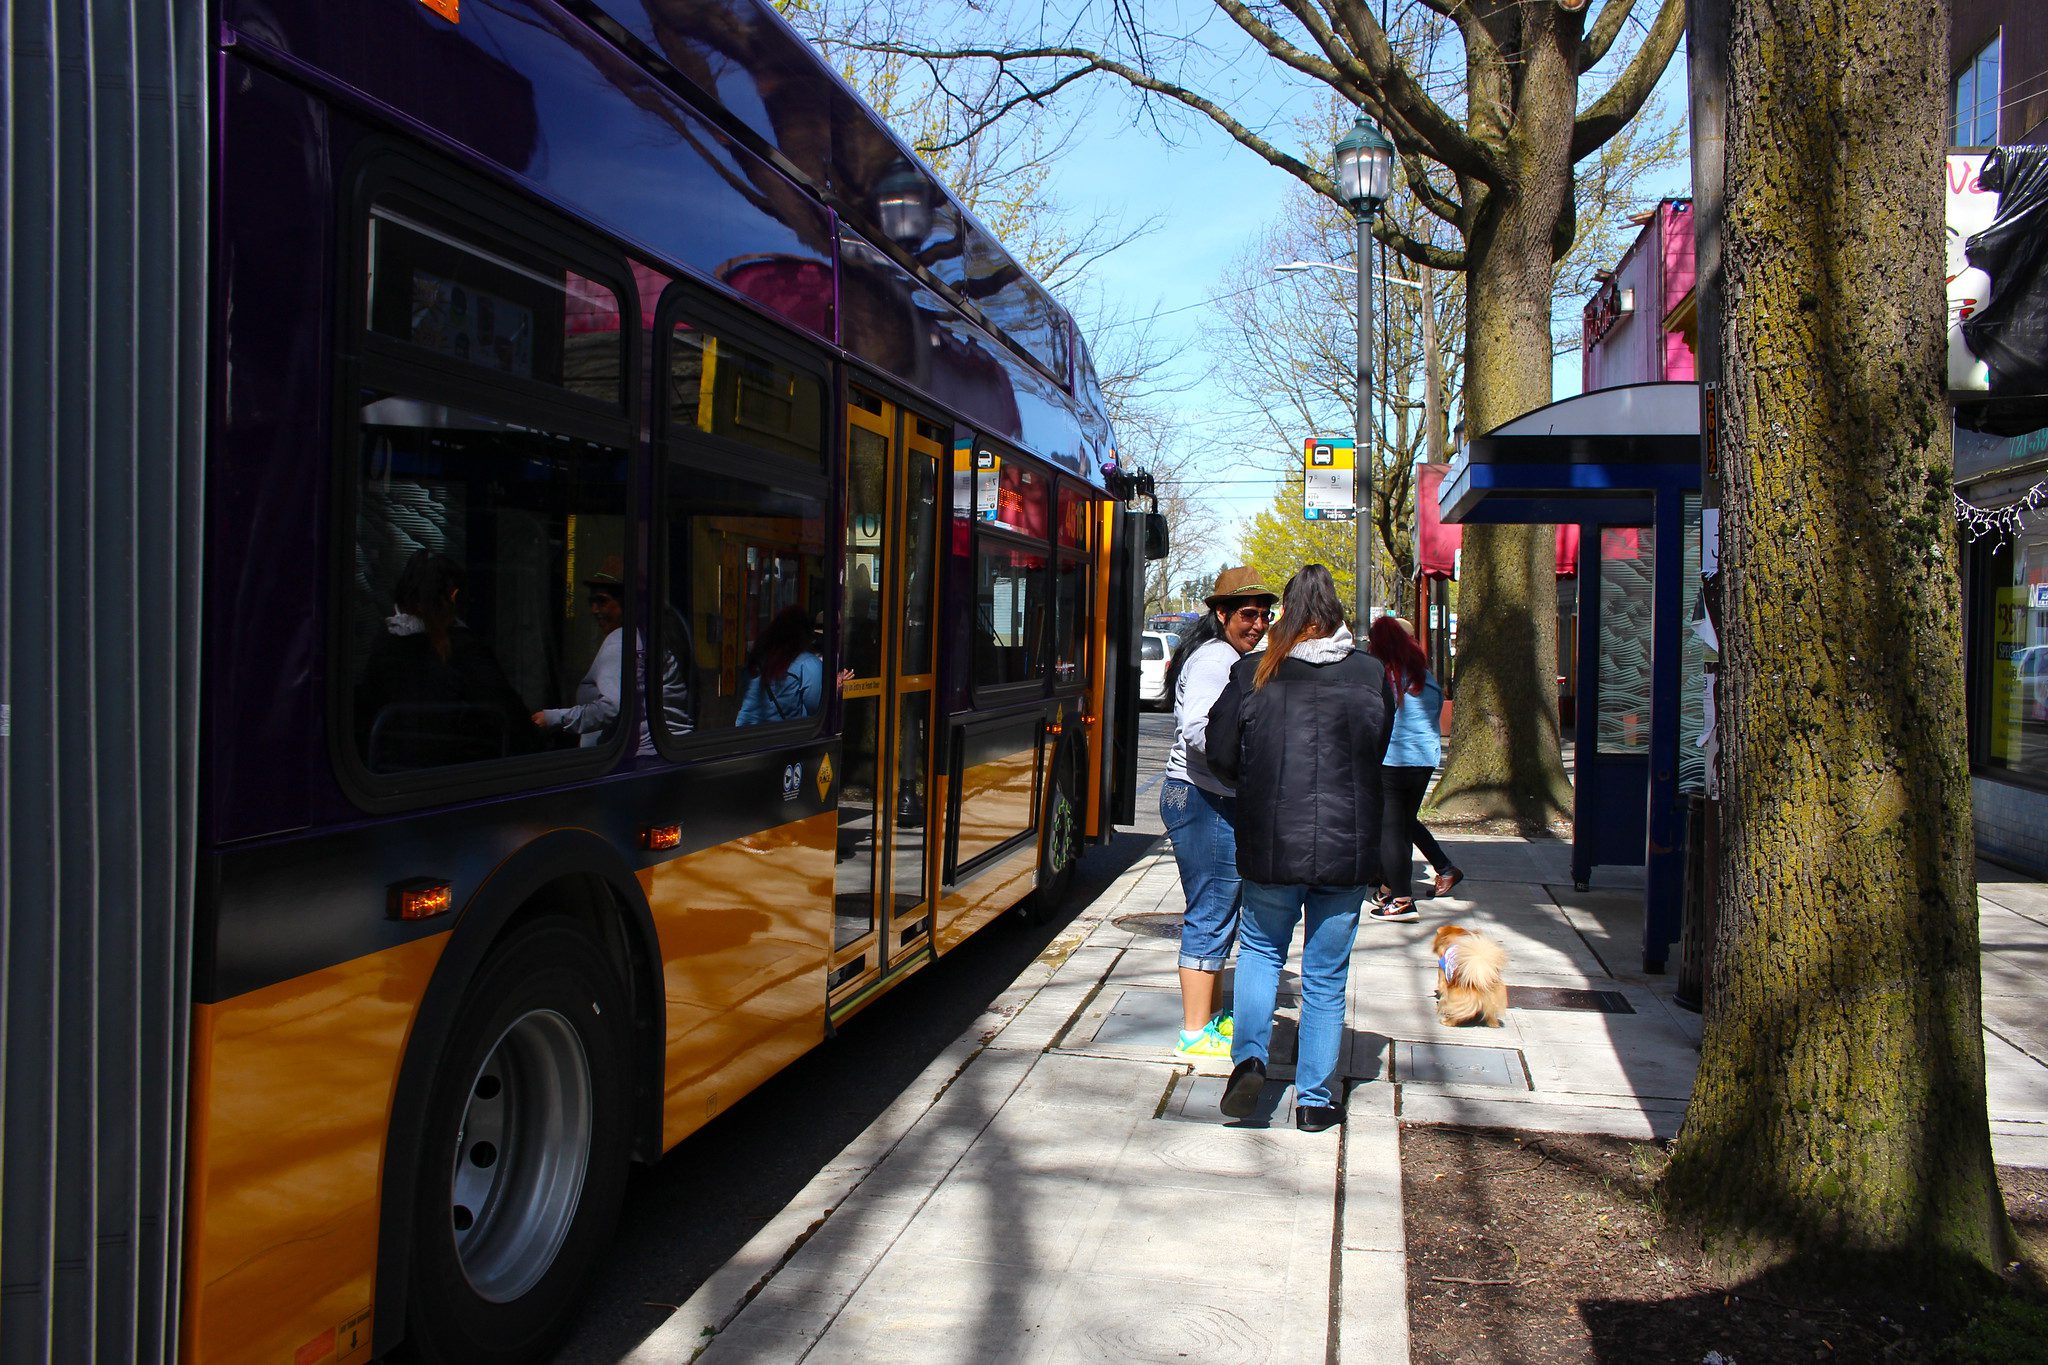 People get on the bus at a bus stop on Rainier Ave S. Trees are visible in the background.